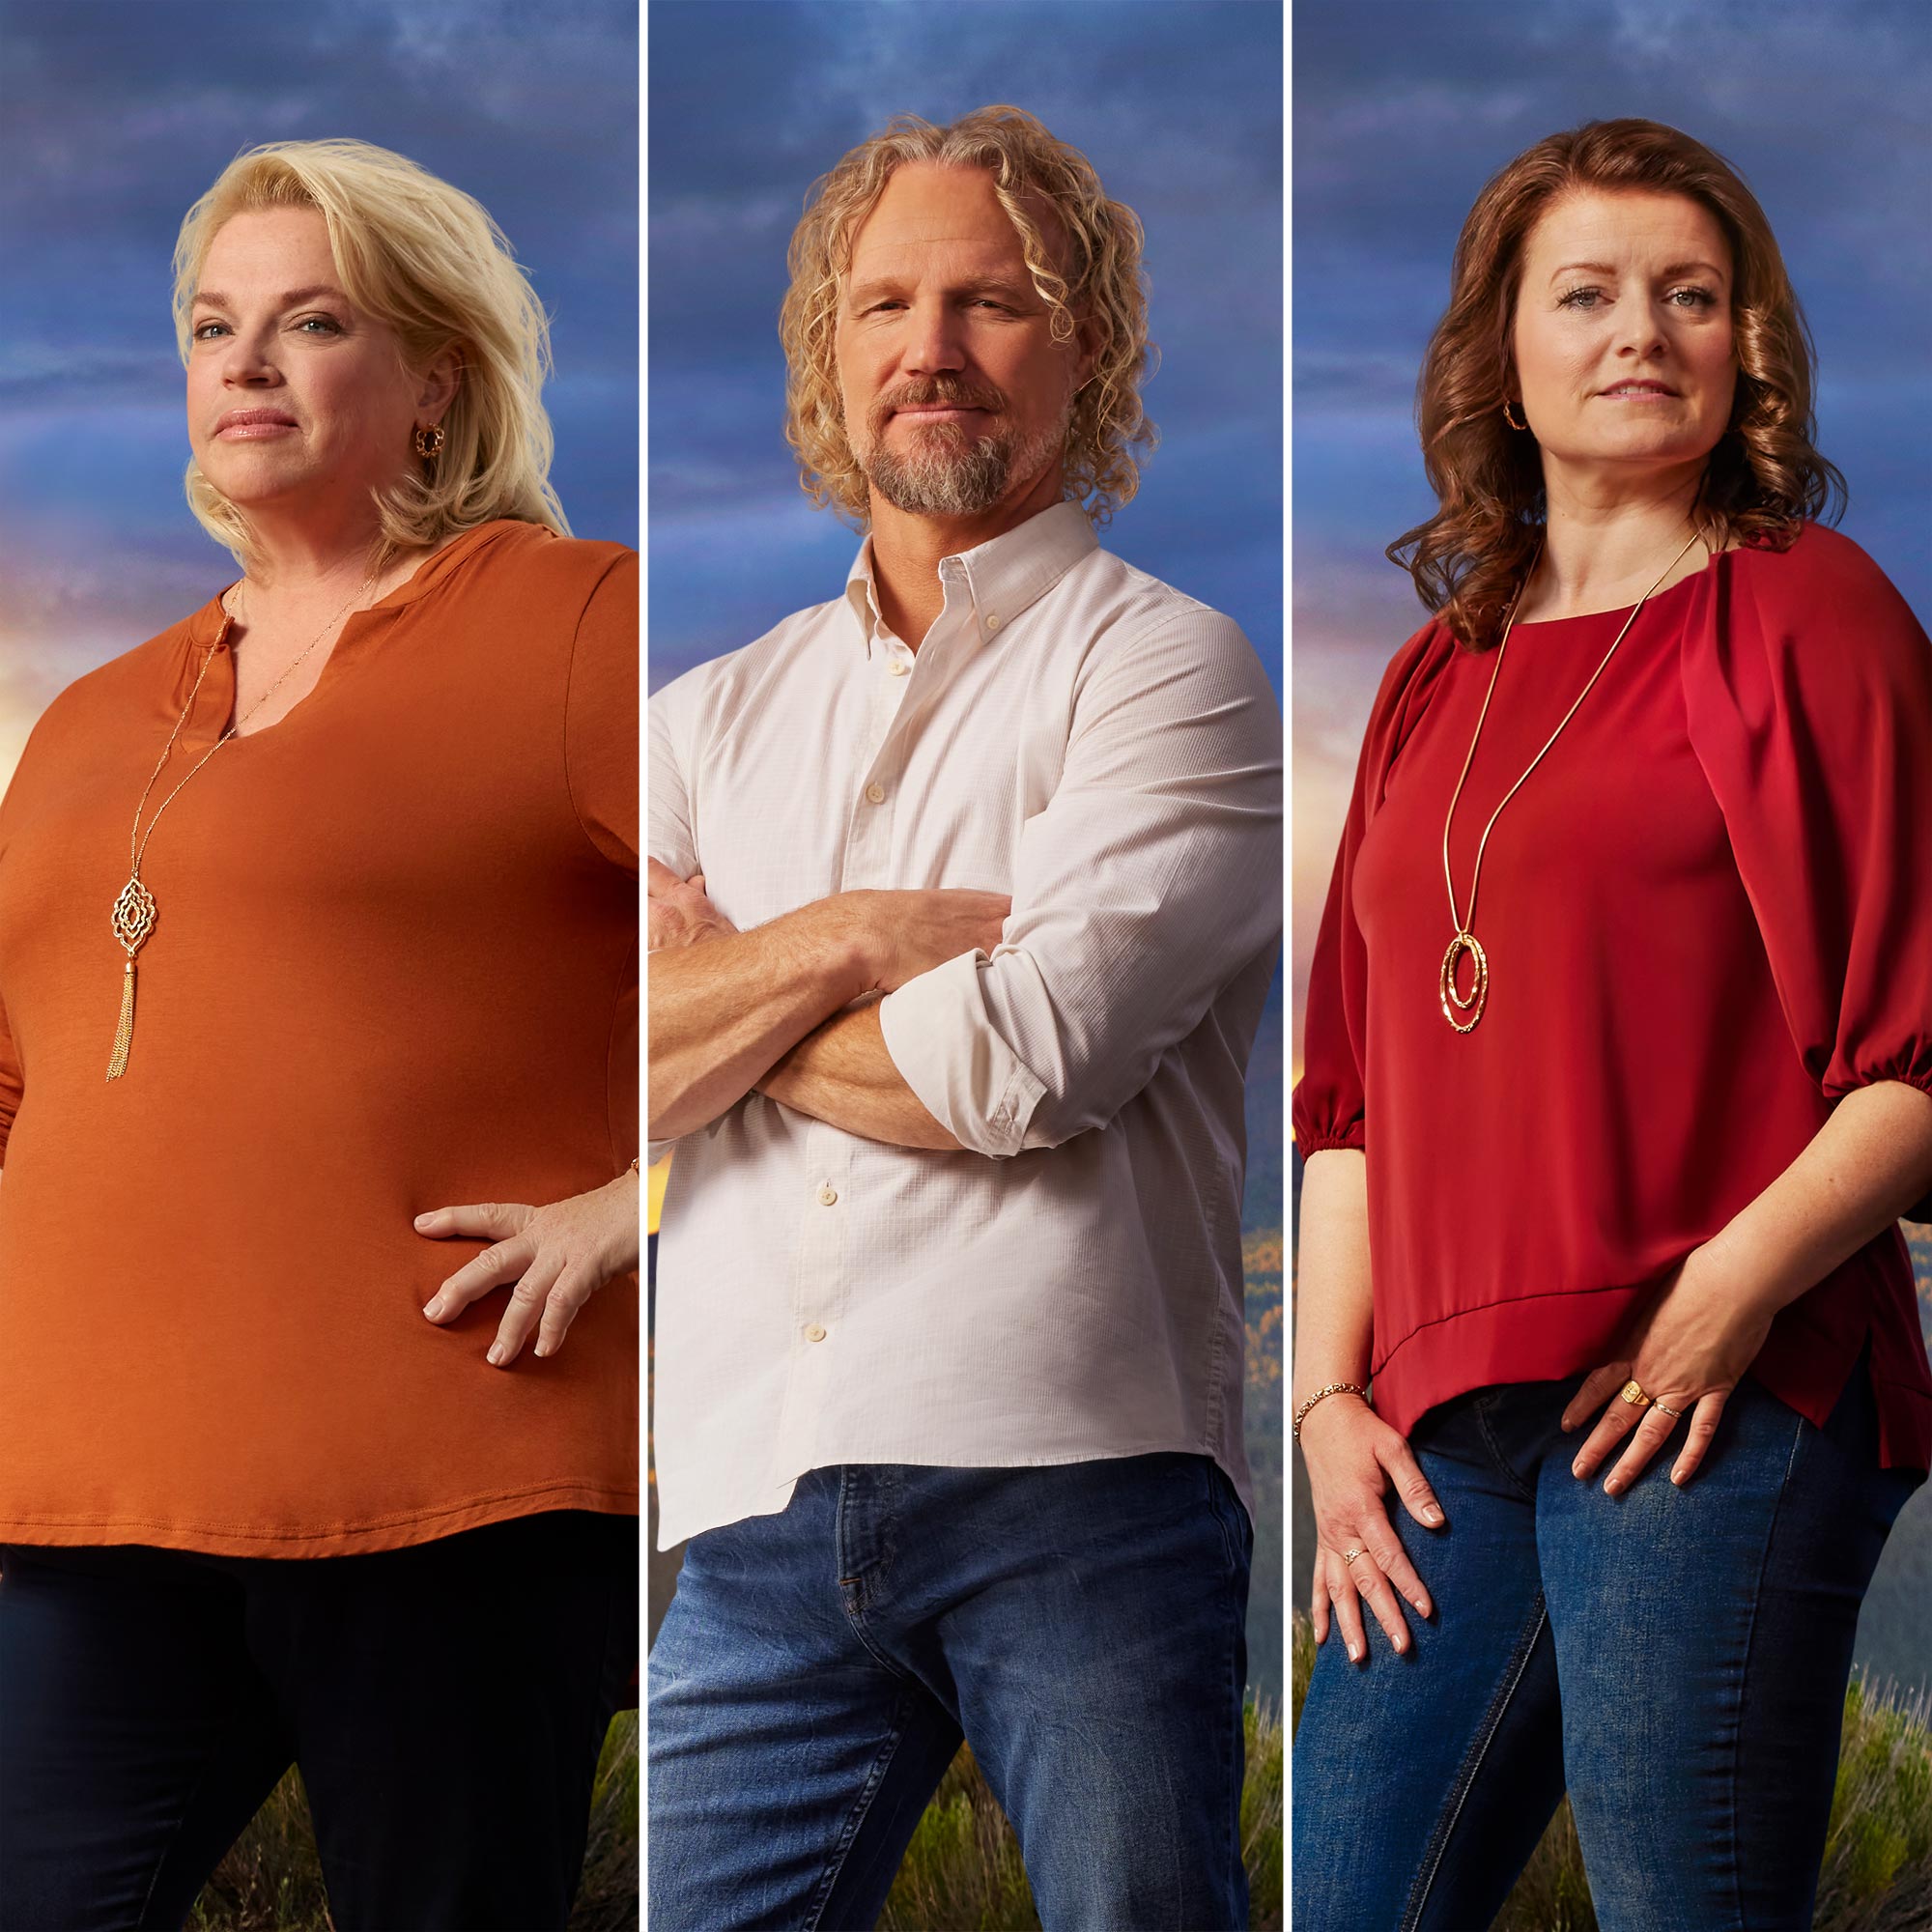 Sister Wives' Janelle Brown Calls Kody, Robyn’s Marriage ‘Superficial’